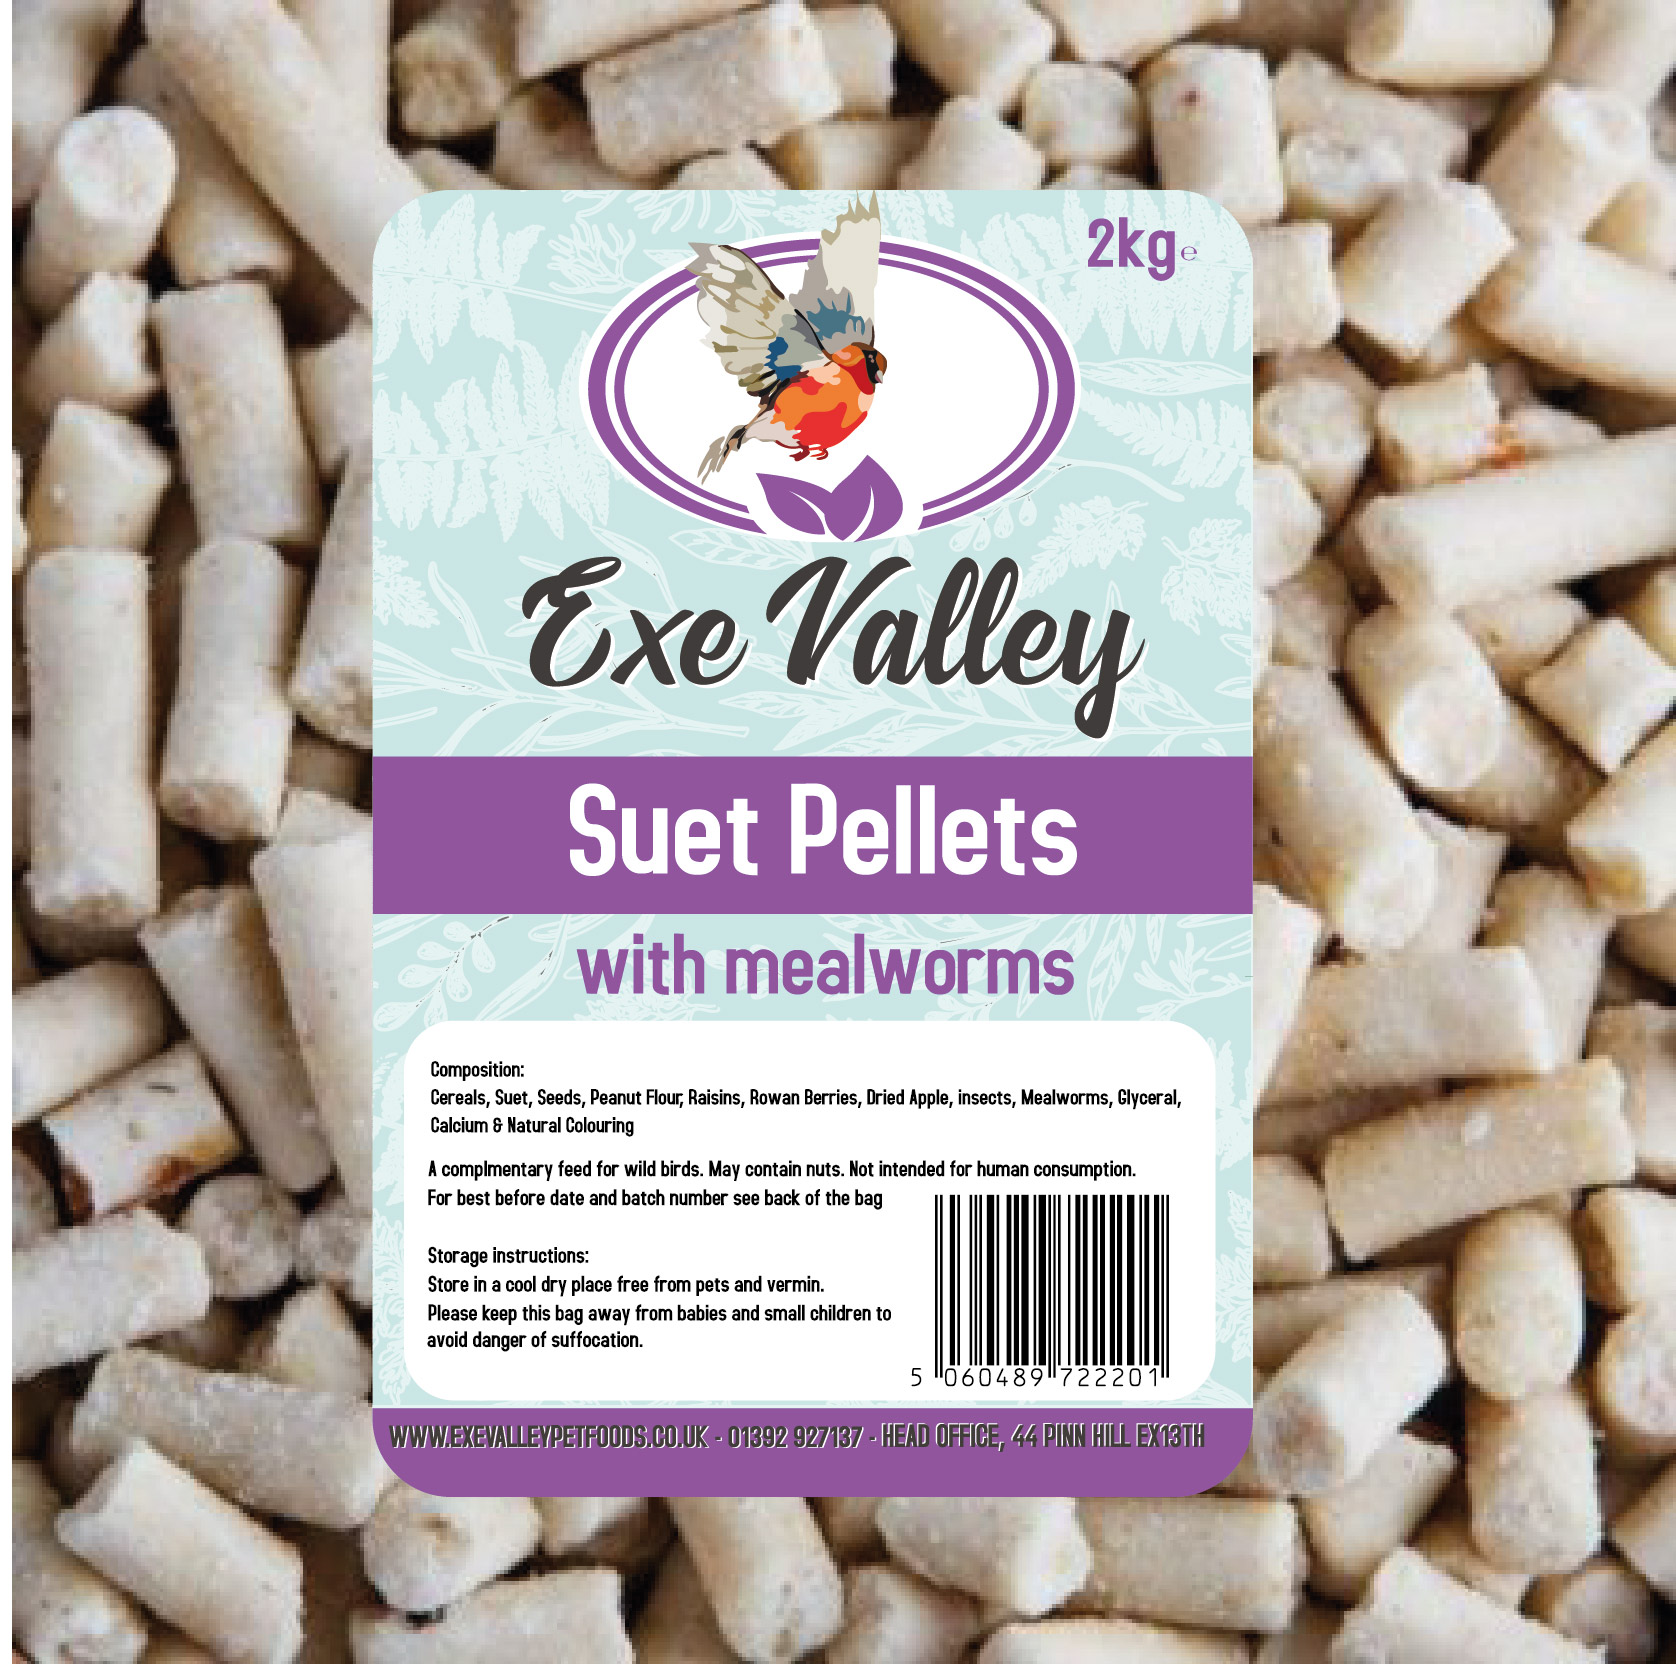 Exe Valley Suet Pellets Mealworms 2kg